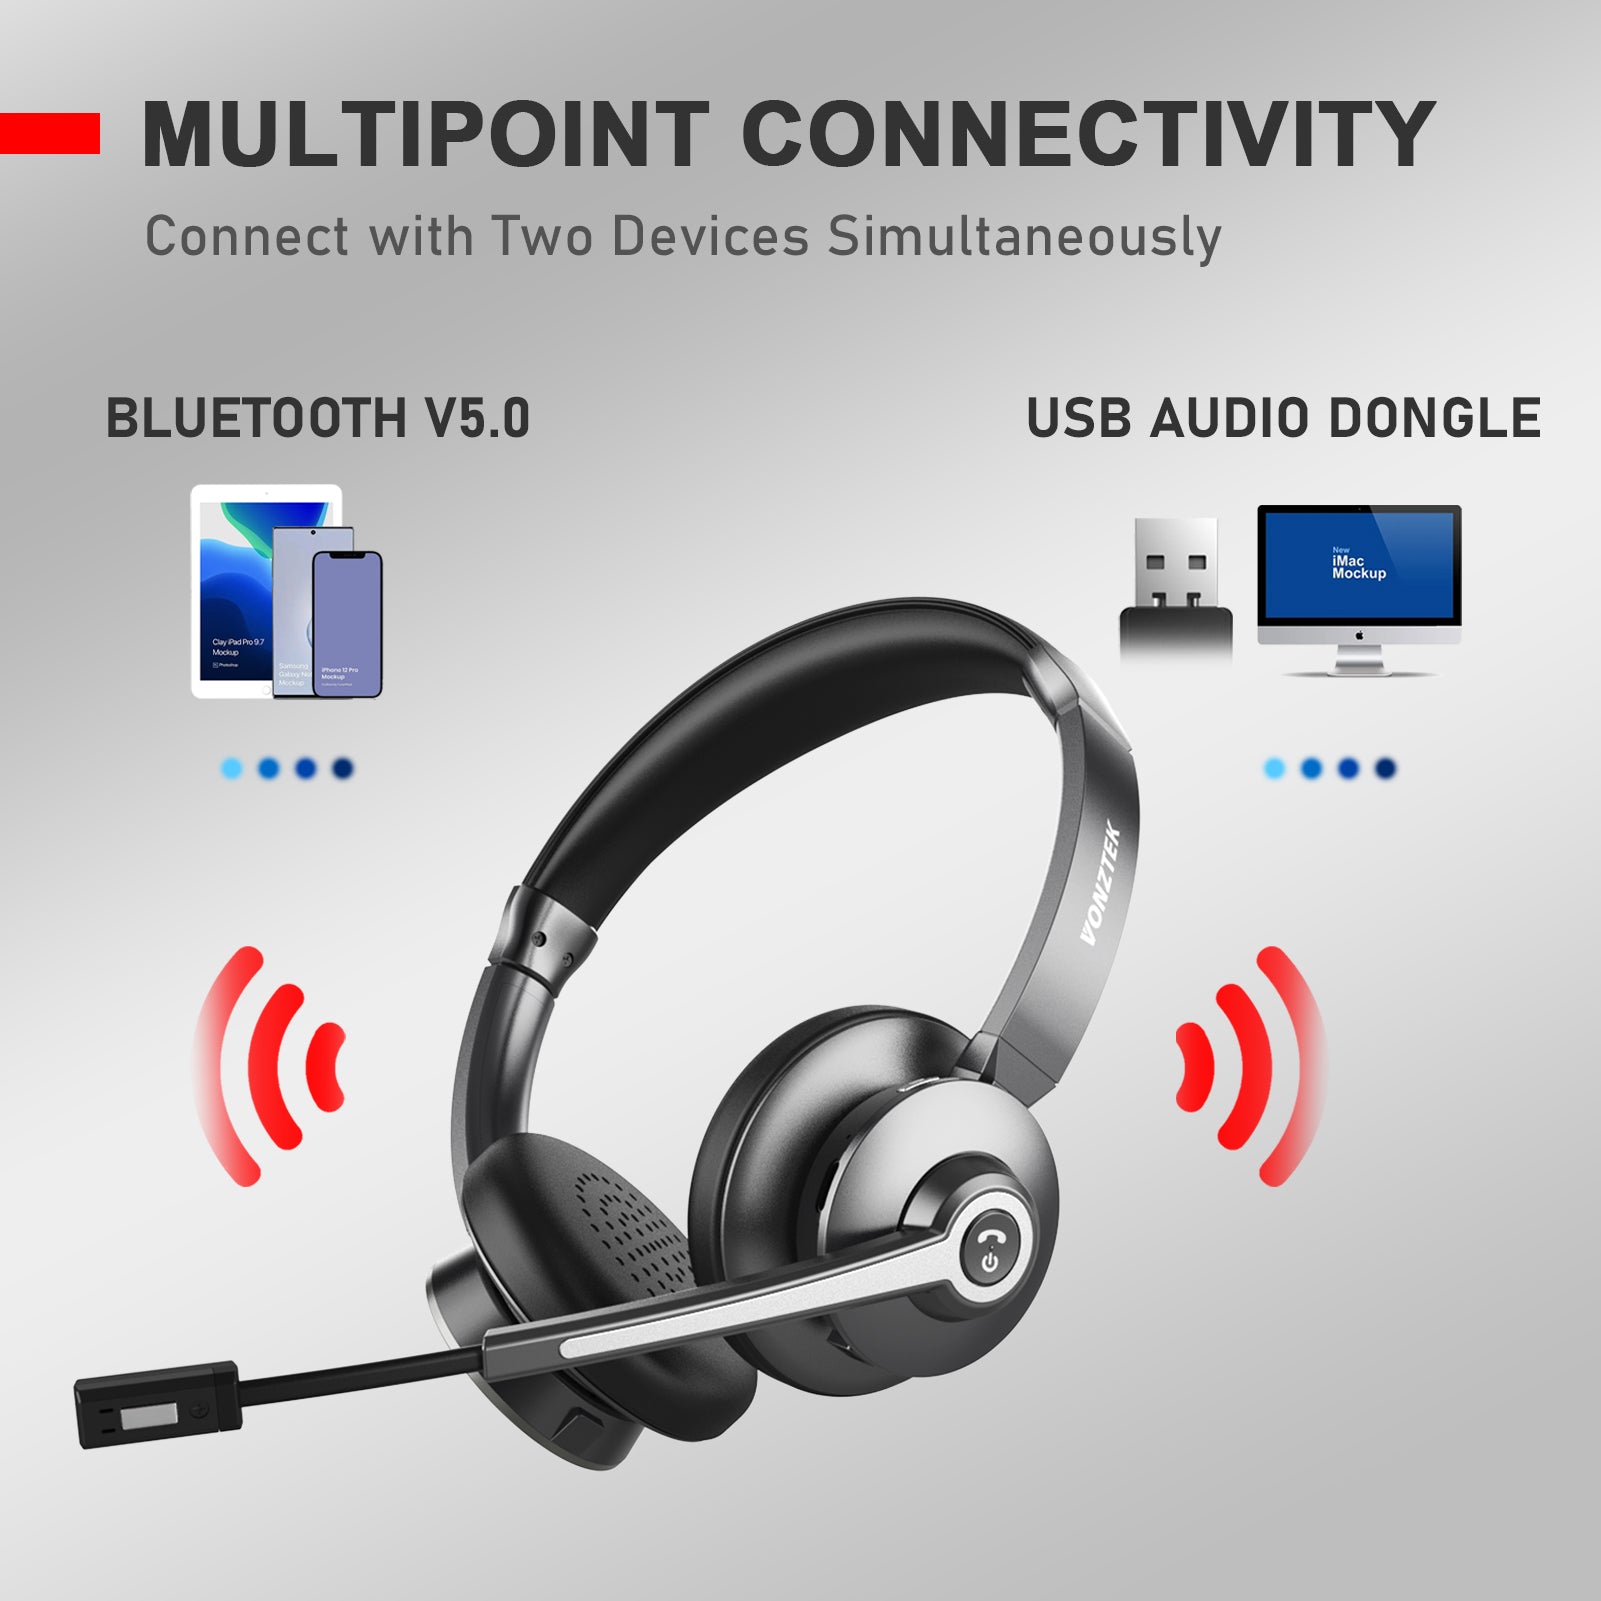 Multipoint connectivity,Connect with two devices simultaneously,Bluetooth V5.0,USB audio dongle.